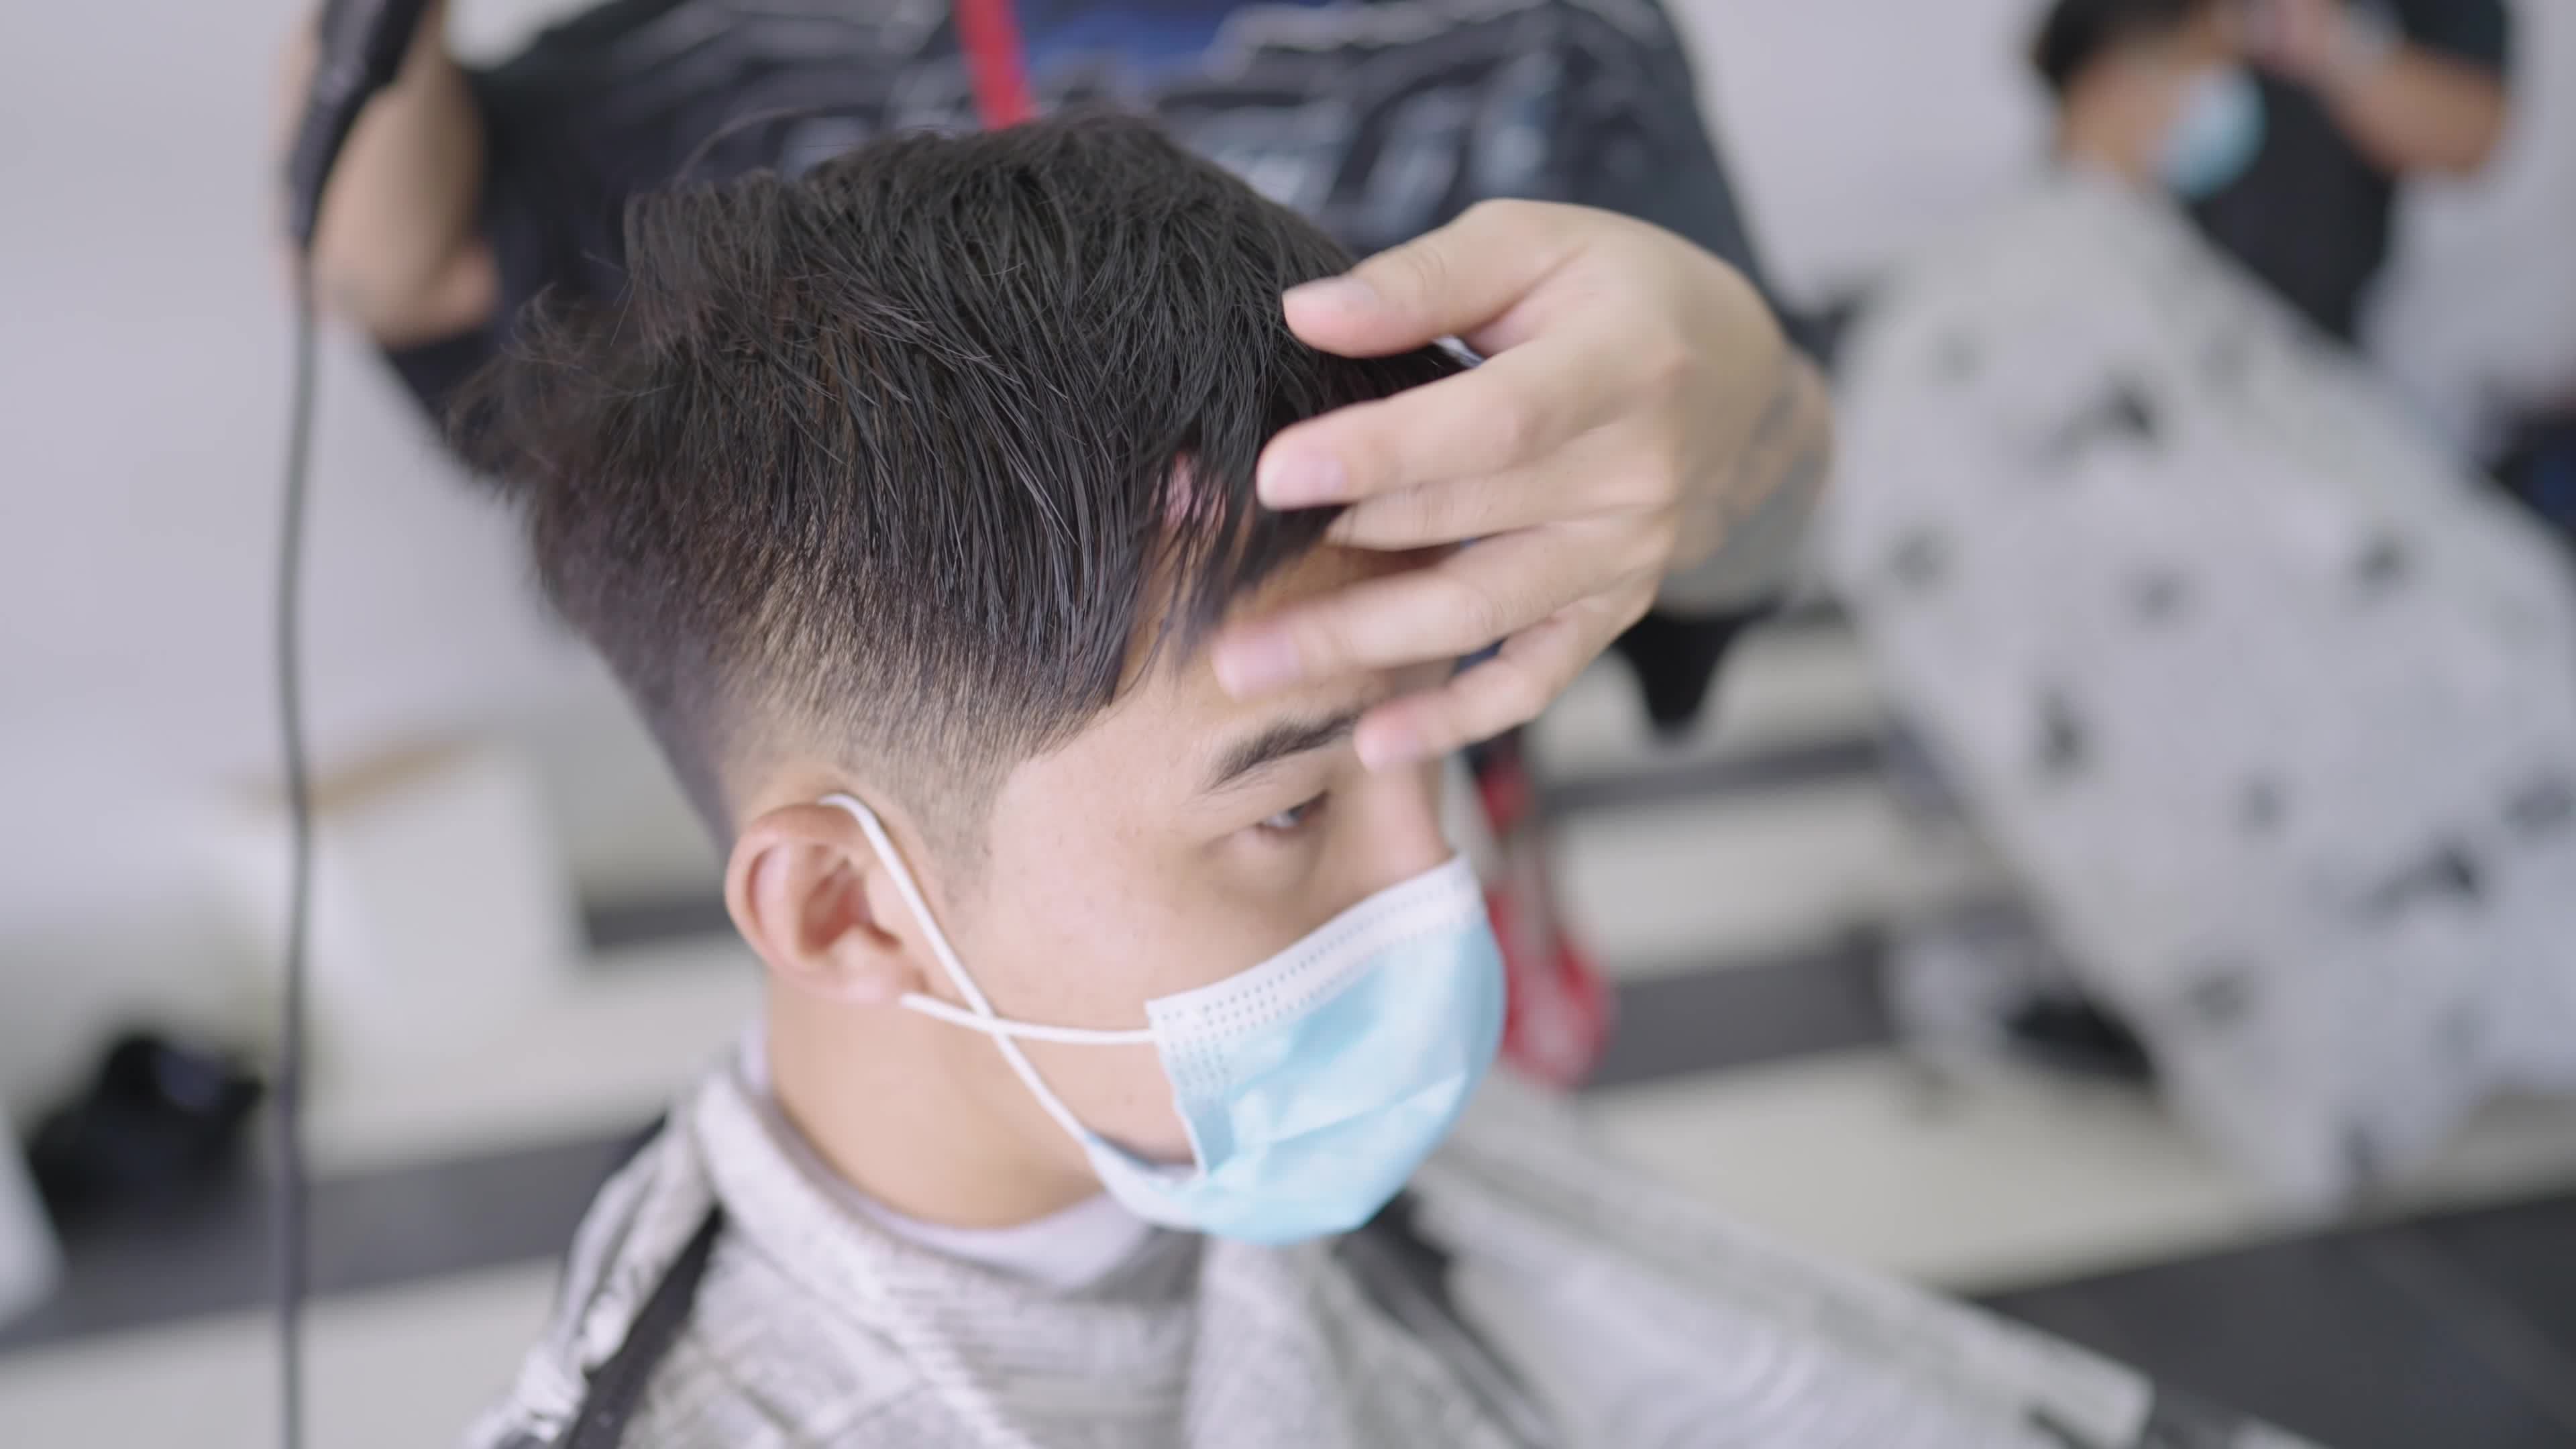 Asian man wear protective mask getting a hair cut during pandemic,  reopening business, professional hairdresser drying client's hairs after  cutting service, grooming check, new normal adaptation 7300740 Stock Video  at Vecteezy